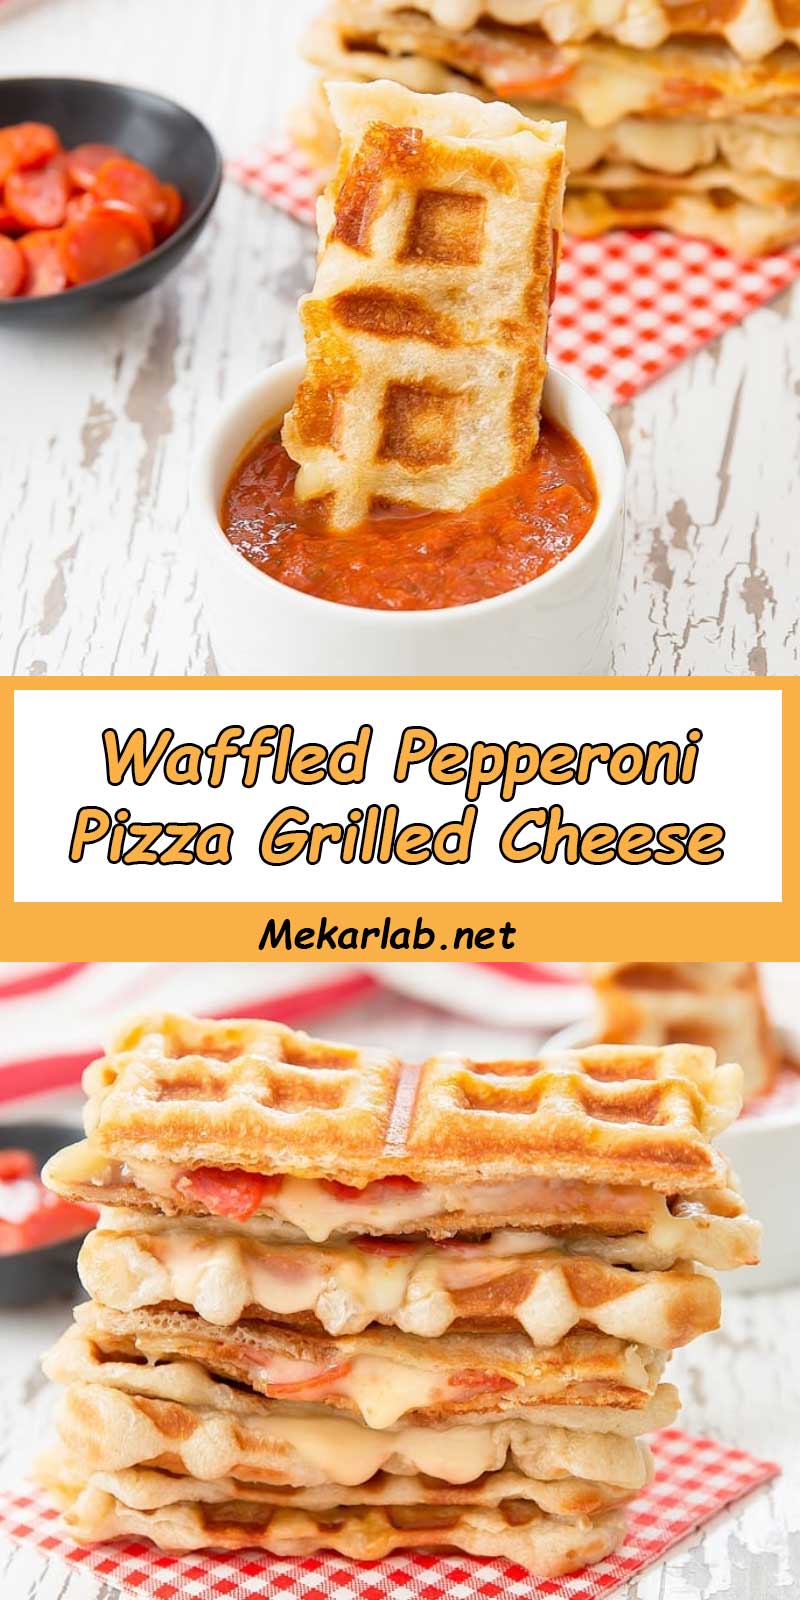 Waffled Pepperoni Pizza Grilled Cheese